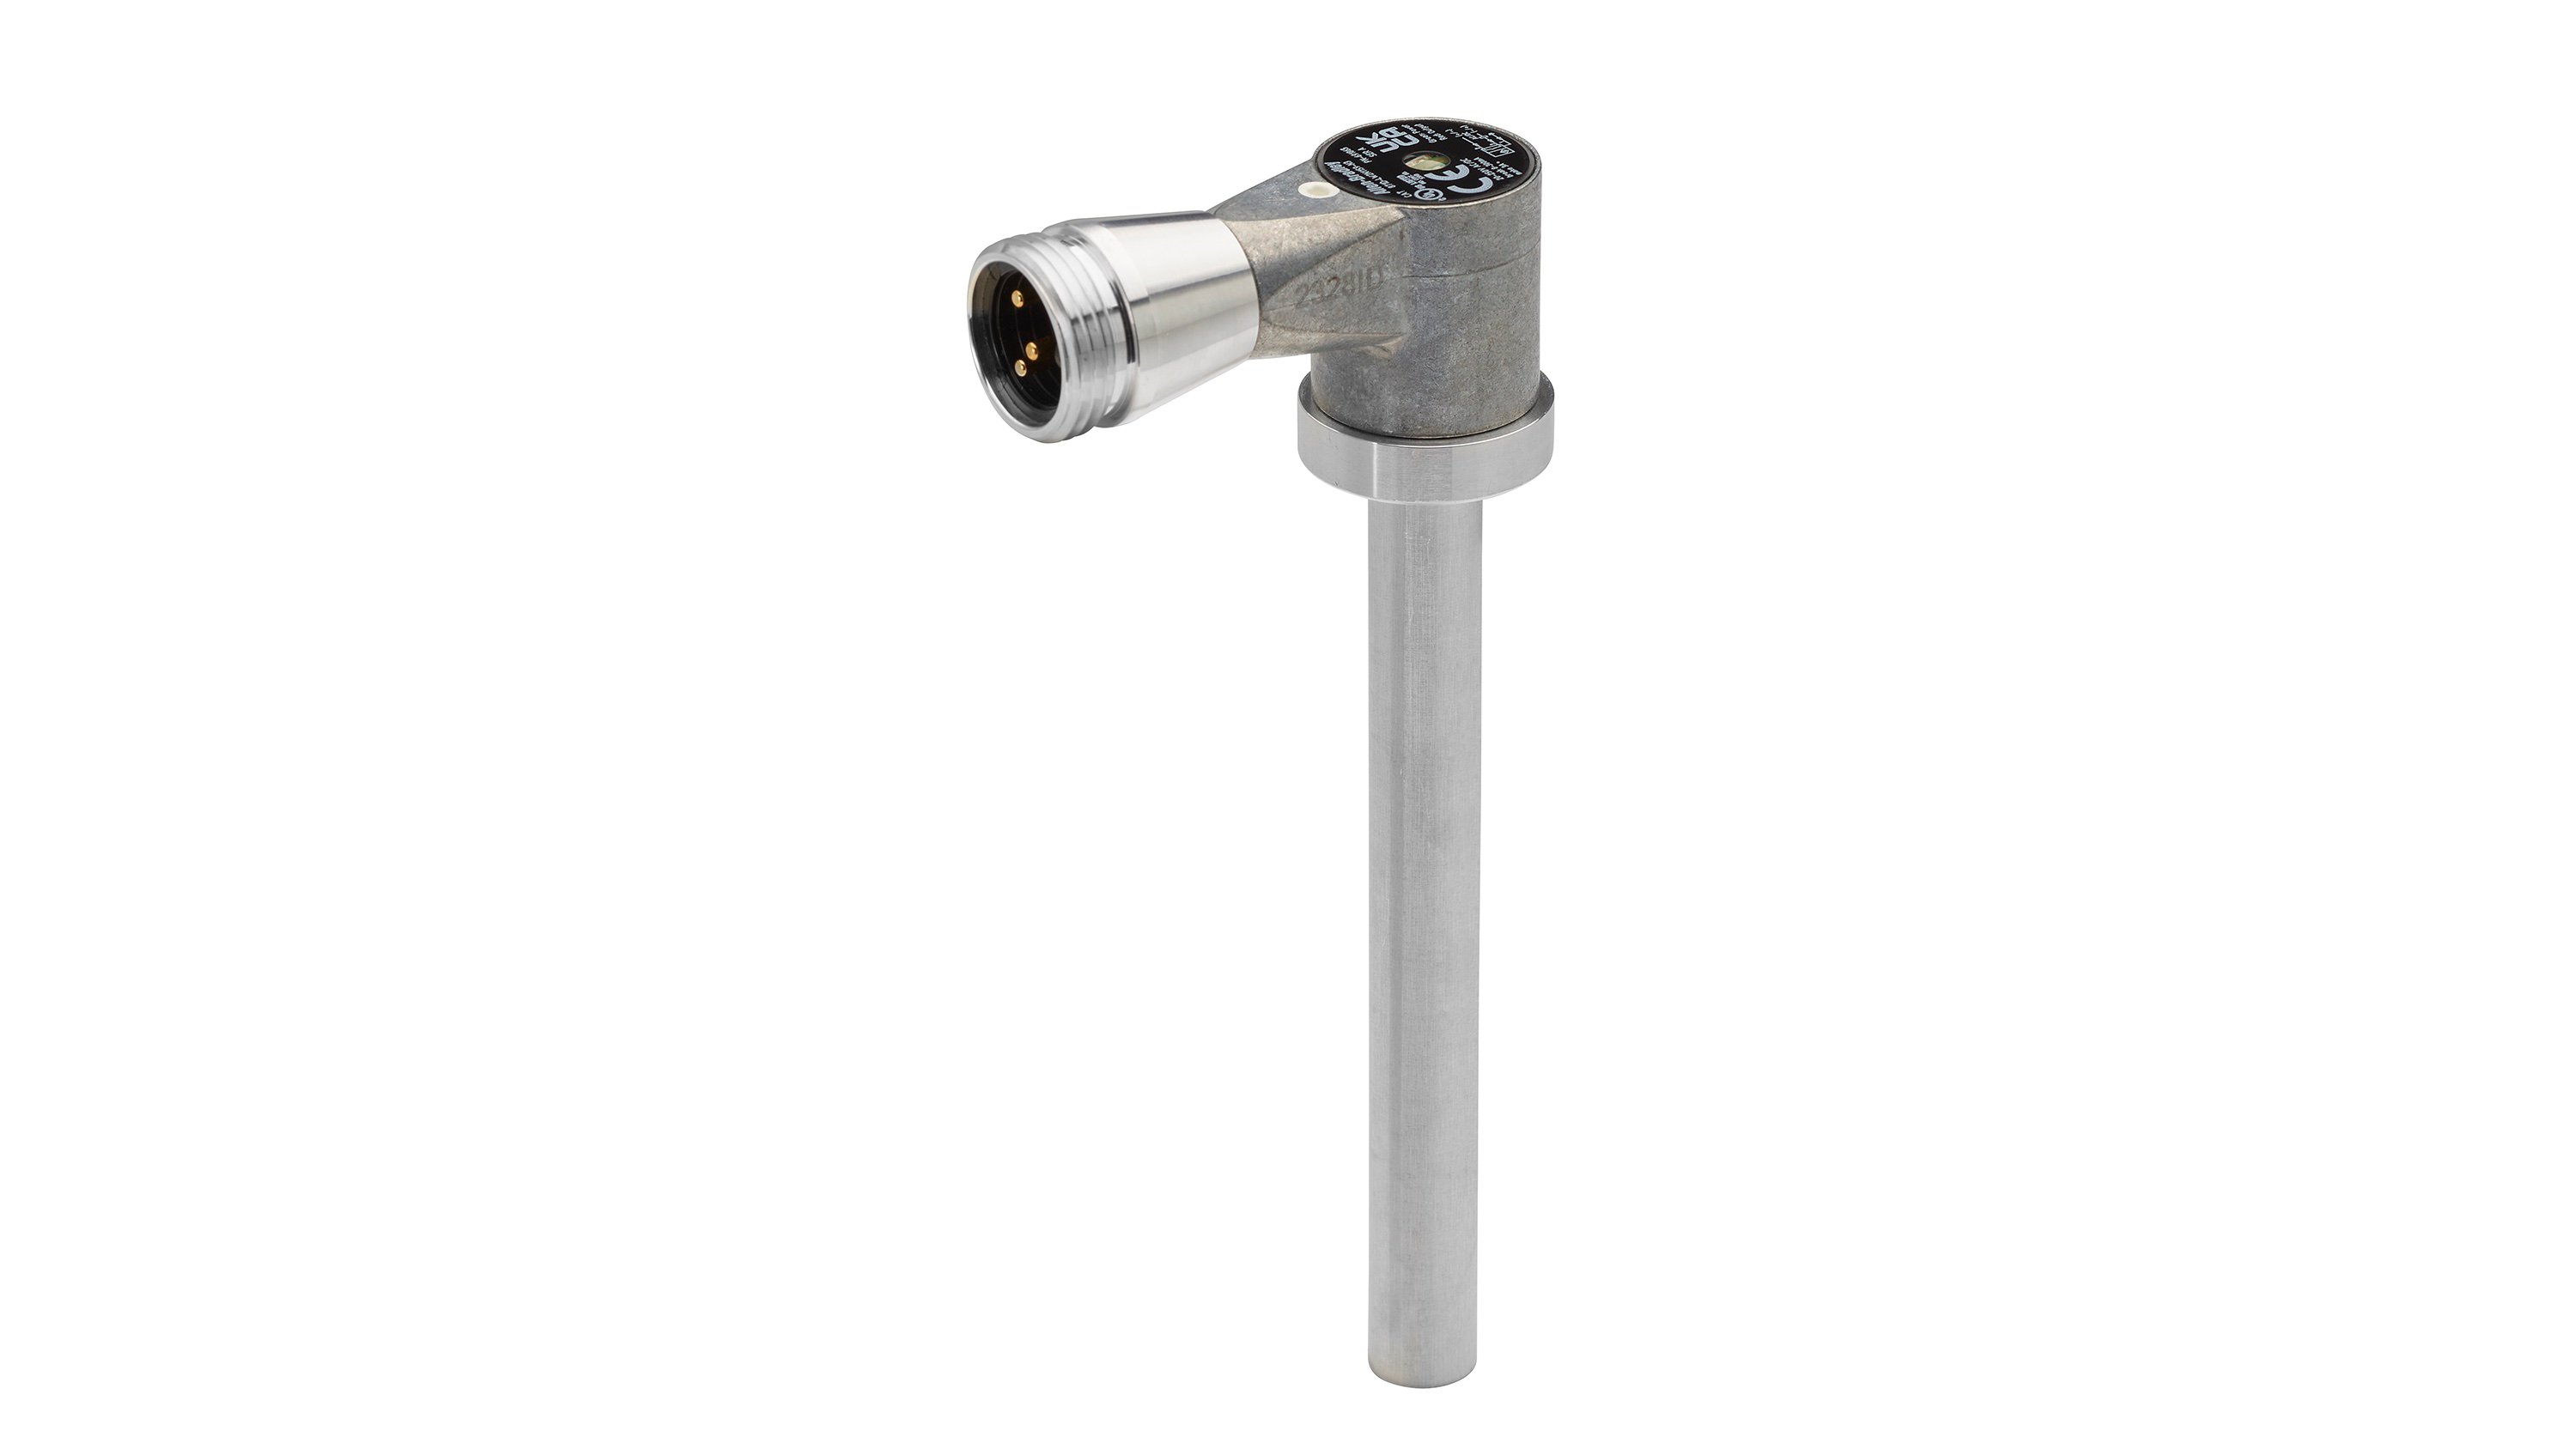 Mini 871D cylinder position proximity sensor with aluminum housing with stainless steel sensor probe facing down and connector facing left.